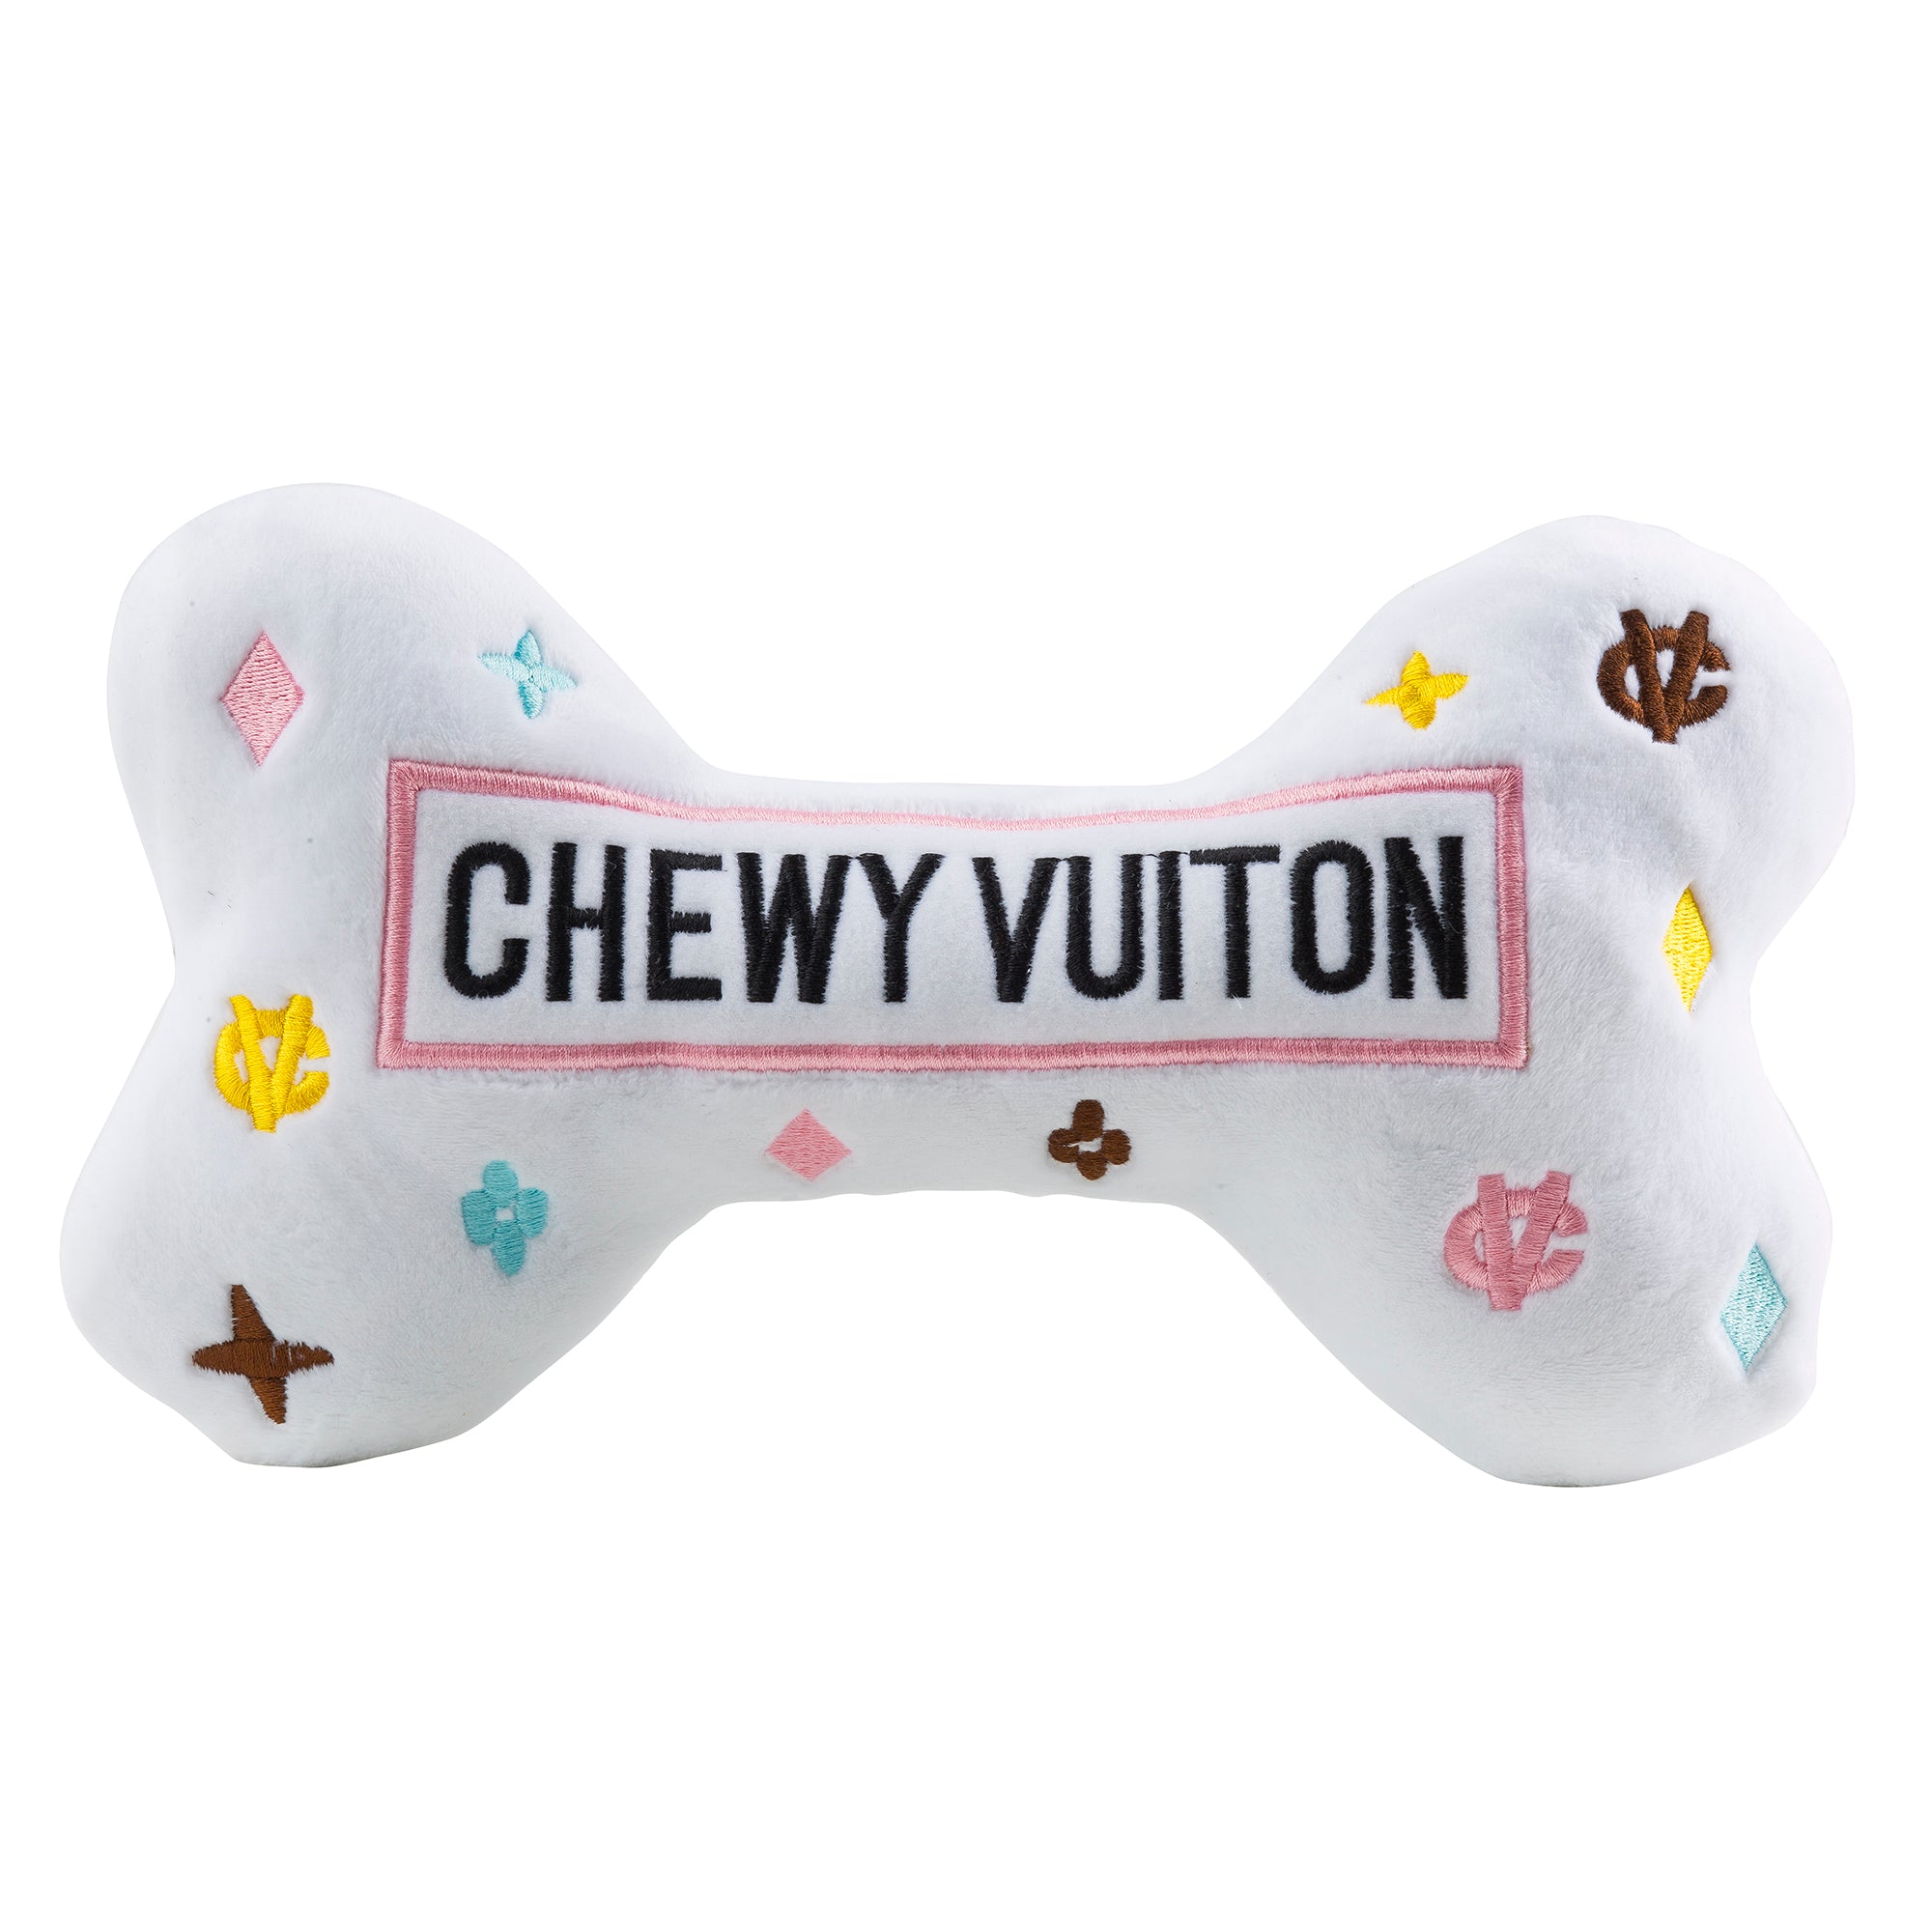 Pet Supplies : Haute Diggity Dog Chewy Vuiton Checker Collection – Soft Plush  Designer Dog Toys with Squeaker and Fun, Unique, Parody Designs from Safe,  Machine-Washable Materials for All Breeds & Sizes 